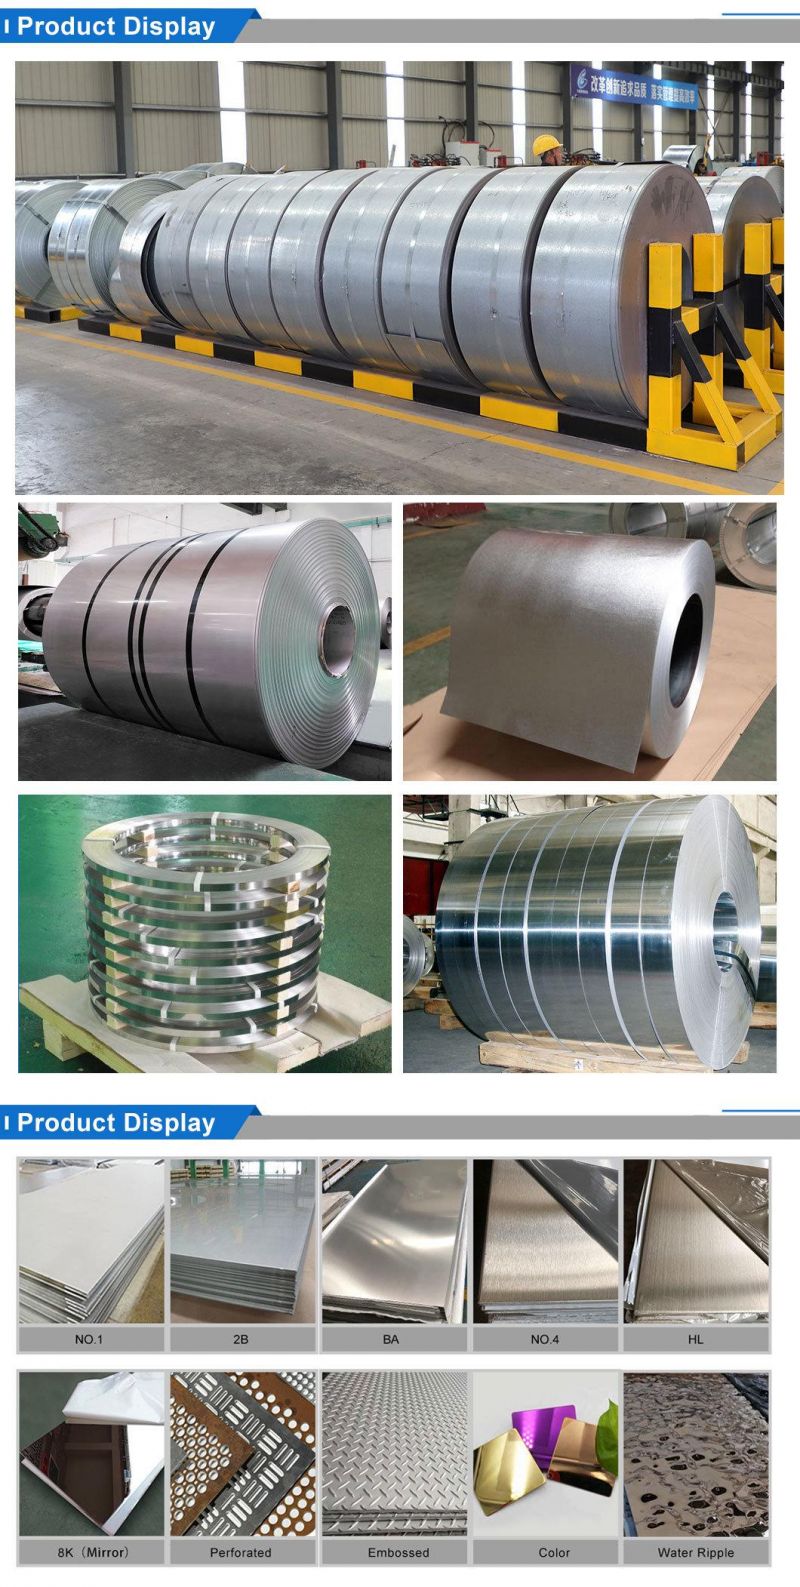 Hot Rolled Stainless Steel Coil No. 1 Surface 304, 304L, 316L, 321, 310S, 410s, 409L, 430, 201, 202